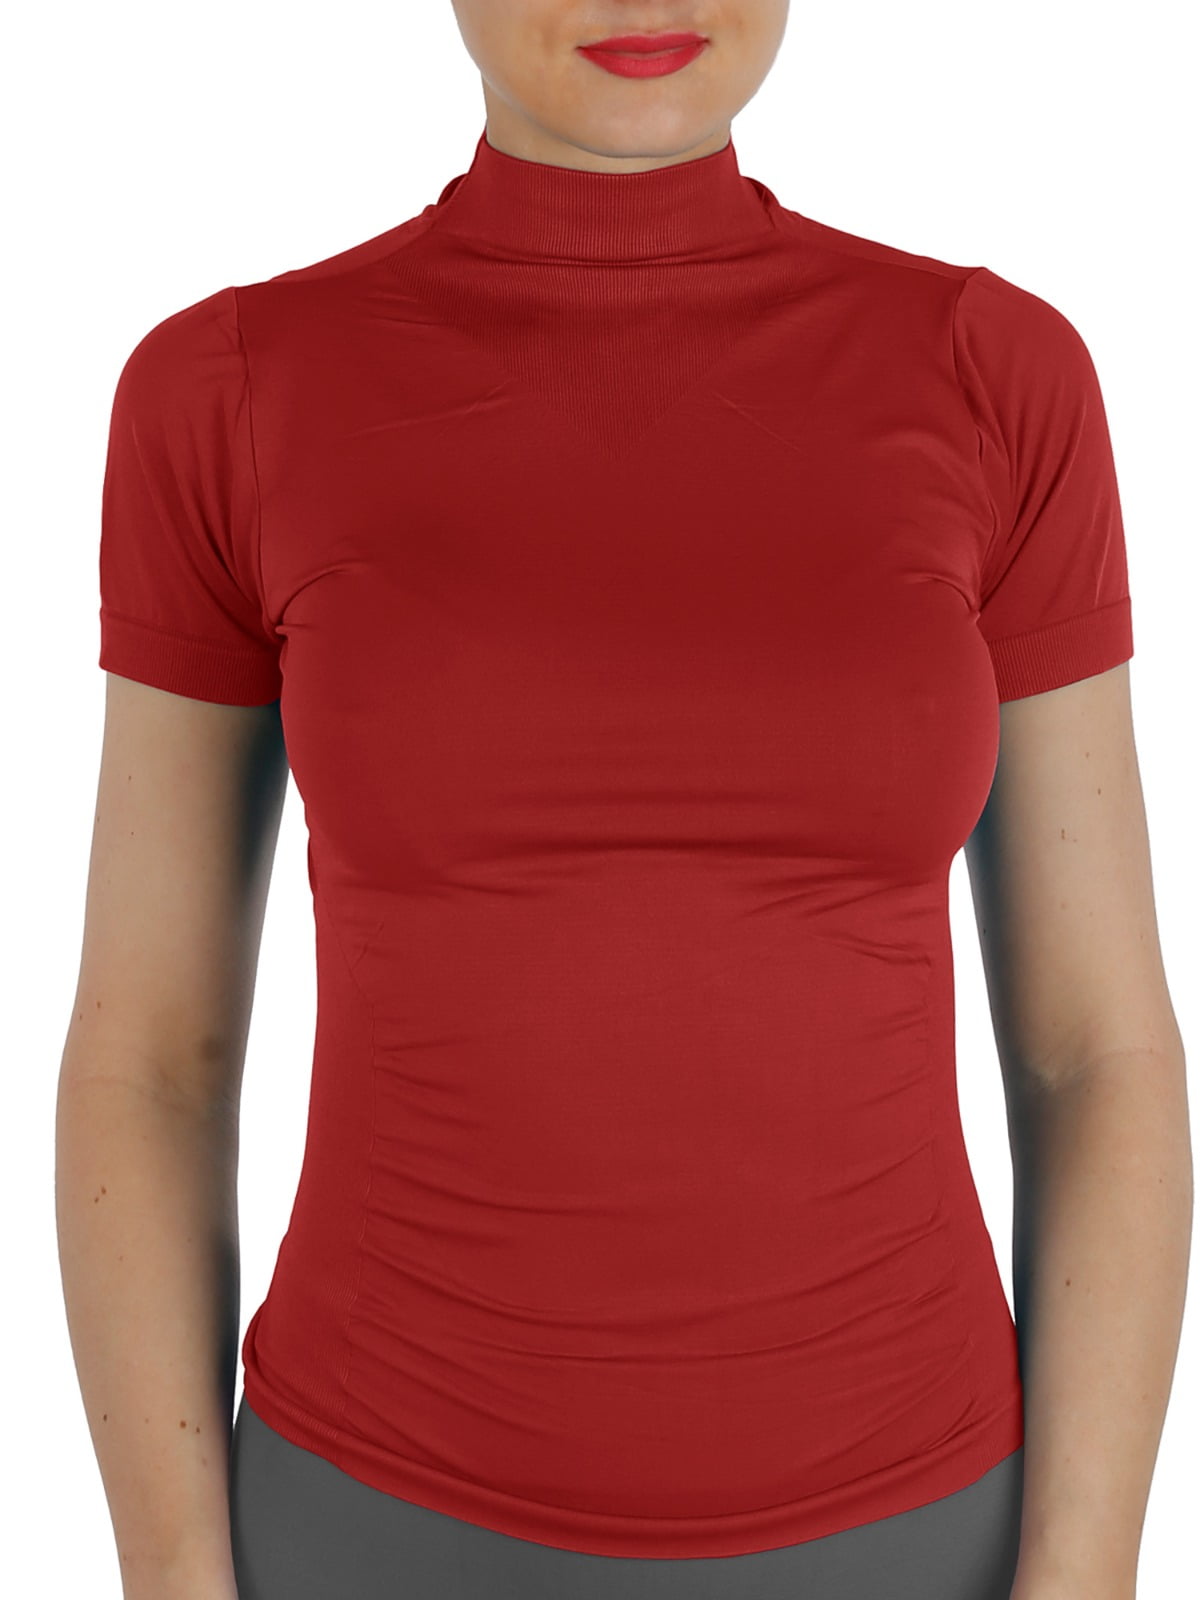 AllyCat Women Short Sleeves Mock Neck Turtleneck Top Stretchy Side Ribbed Slim Fit Tight Shirts